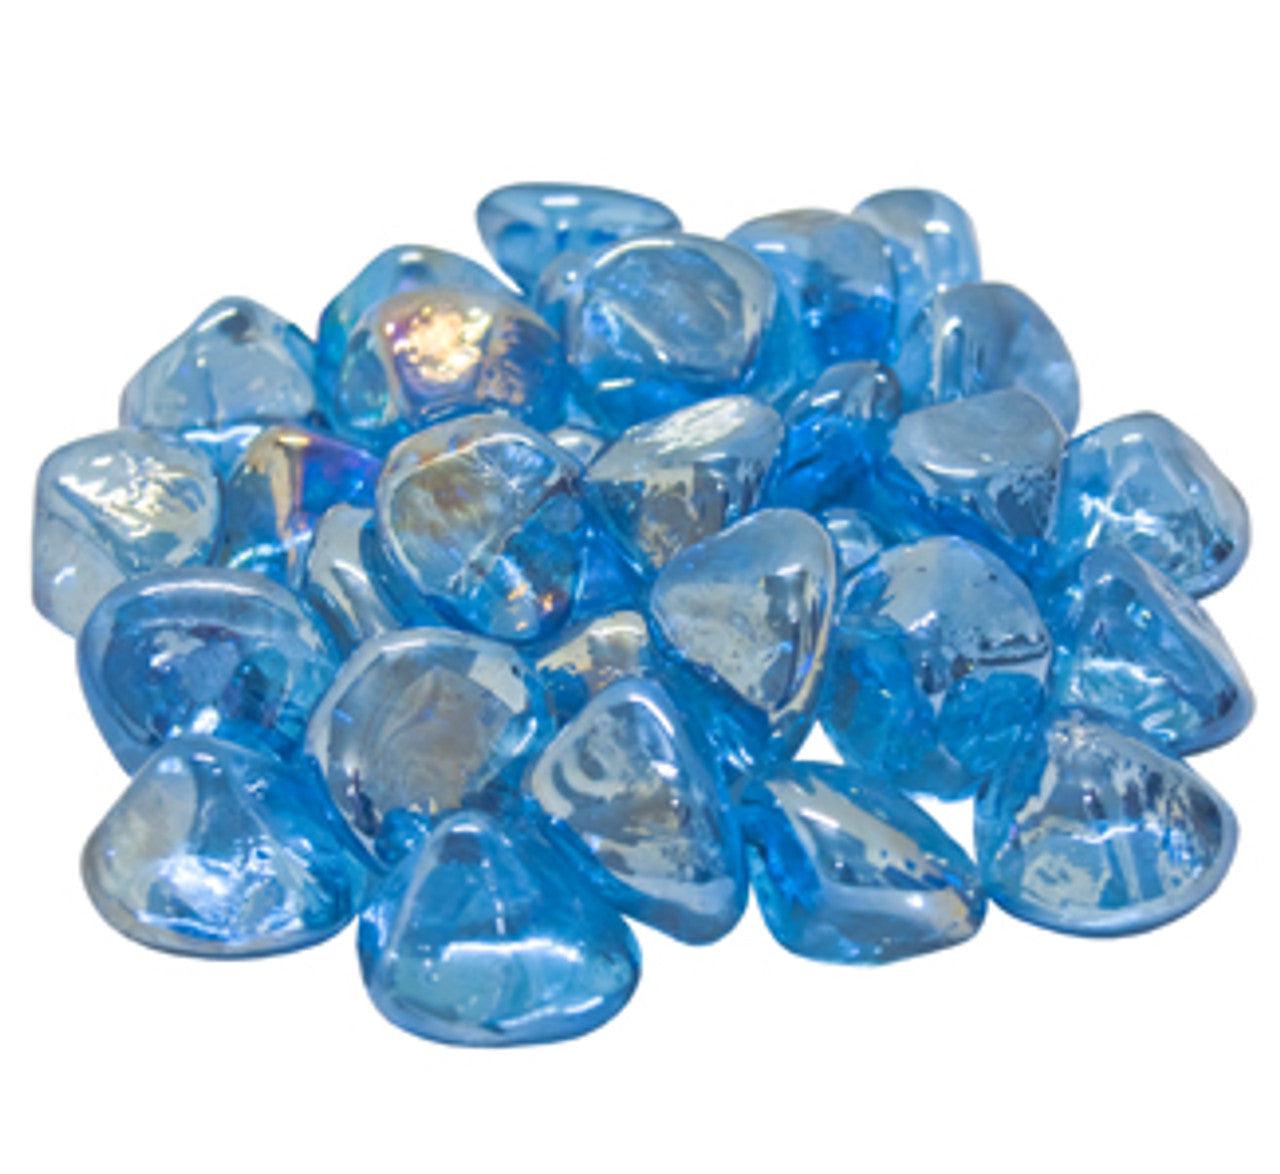 30 lb. Package of Diamond Nuggets Glass Media